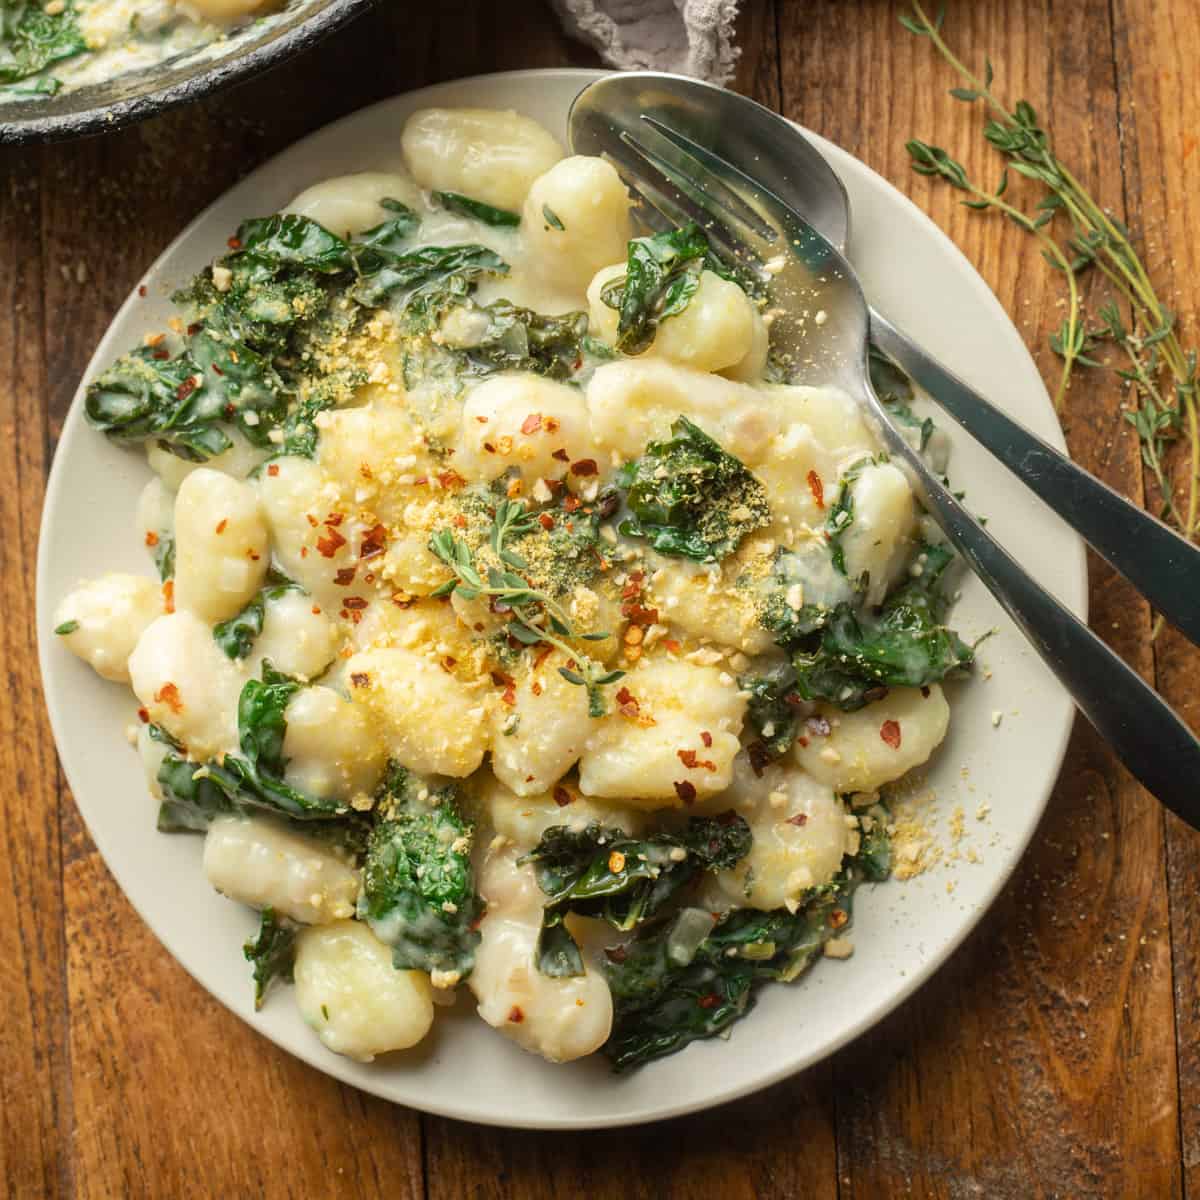 Plate of Vegan Gnocchi with Creamy Lemon Garlic Sauce with fork and spoon.